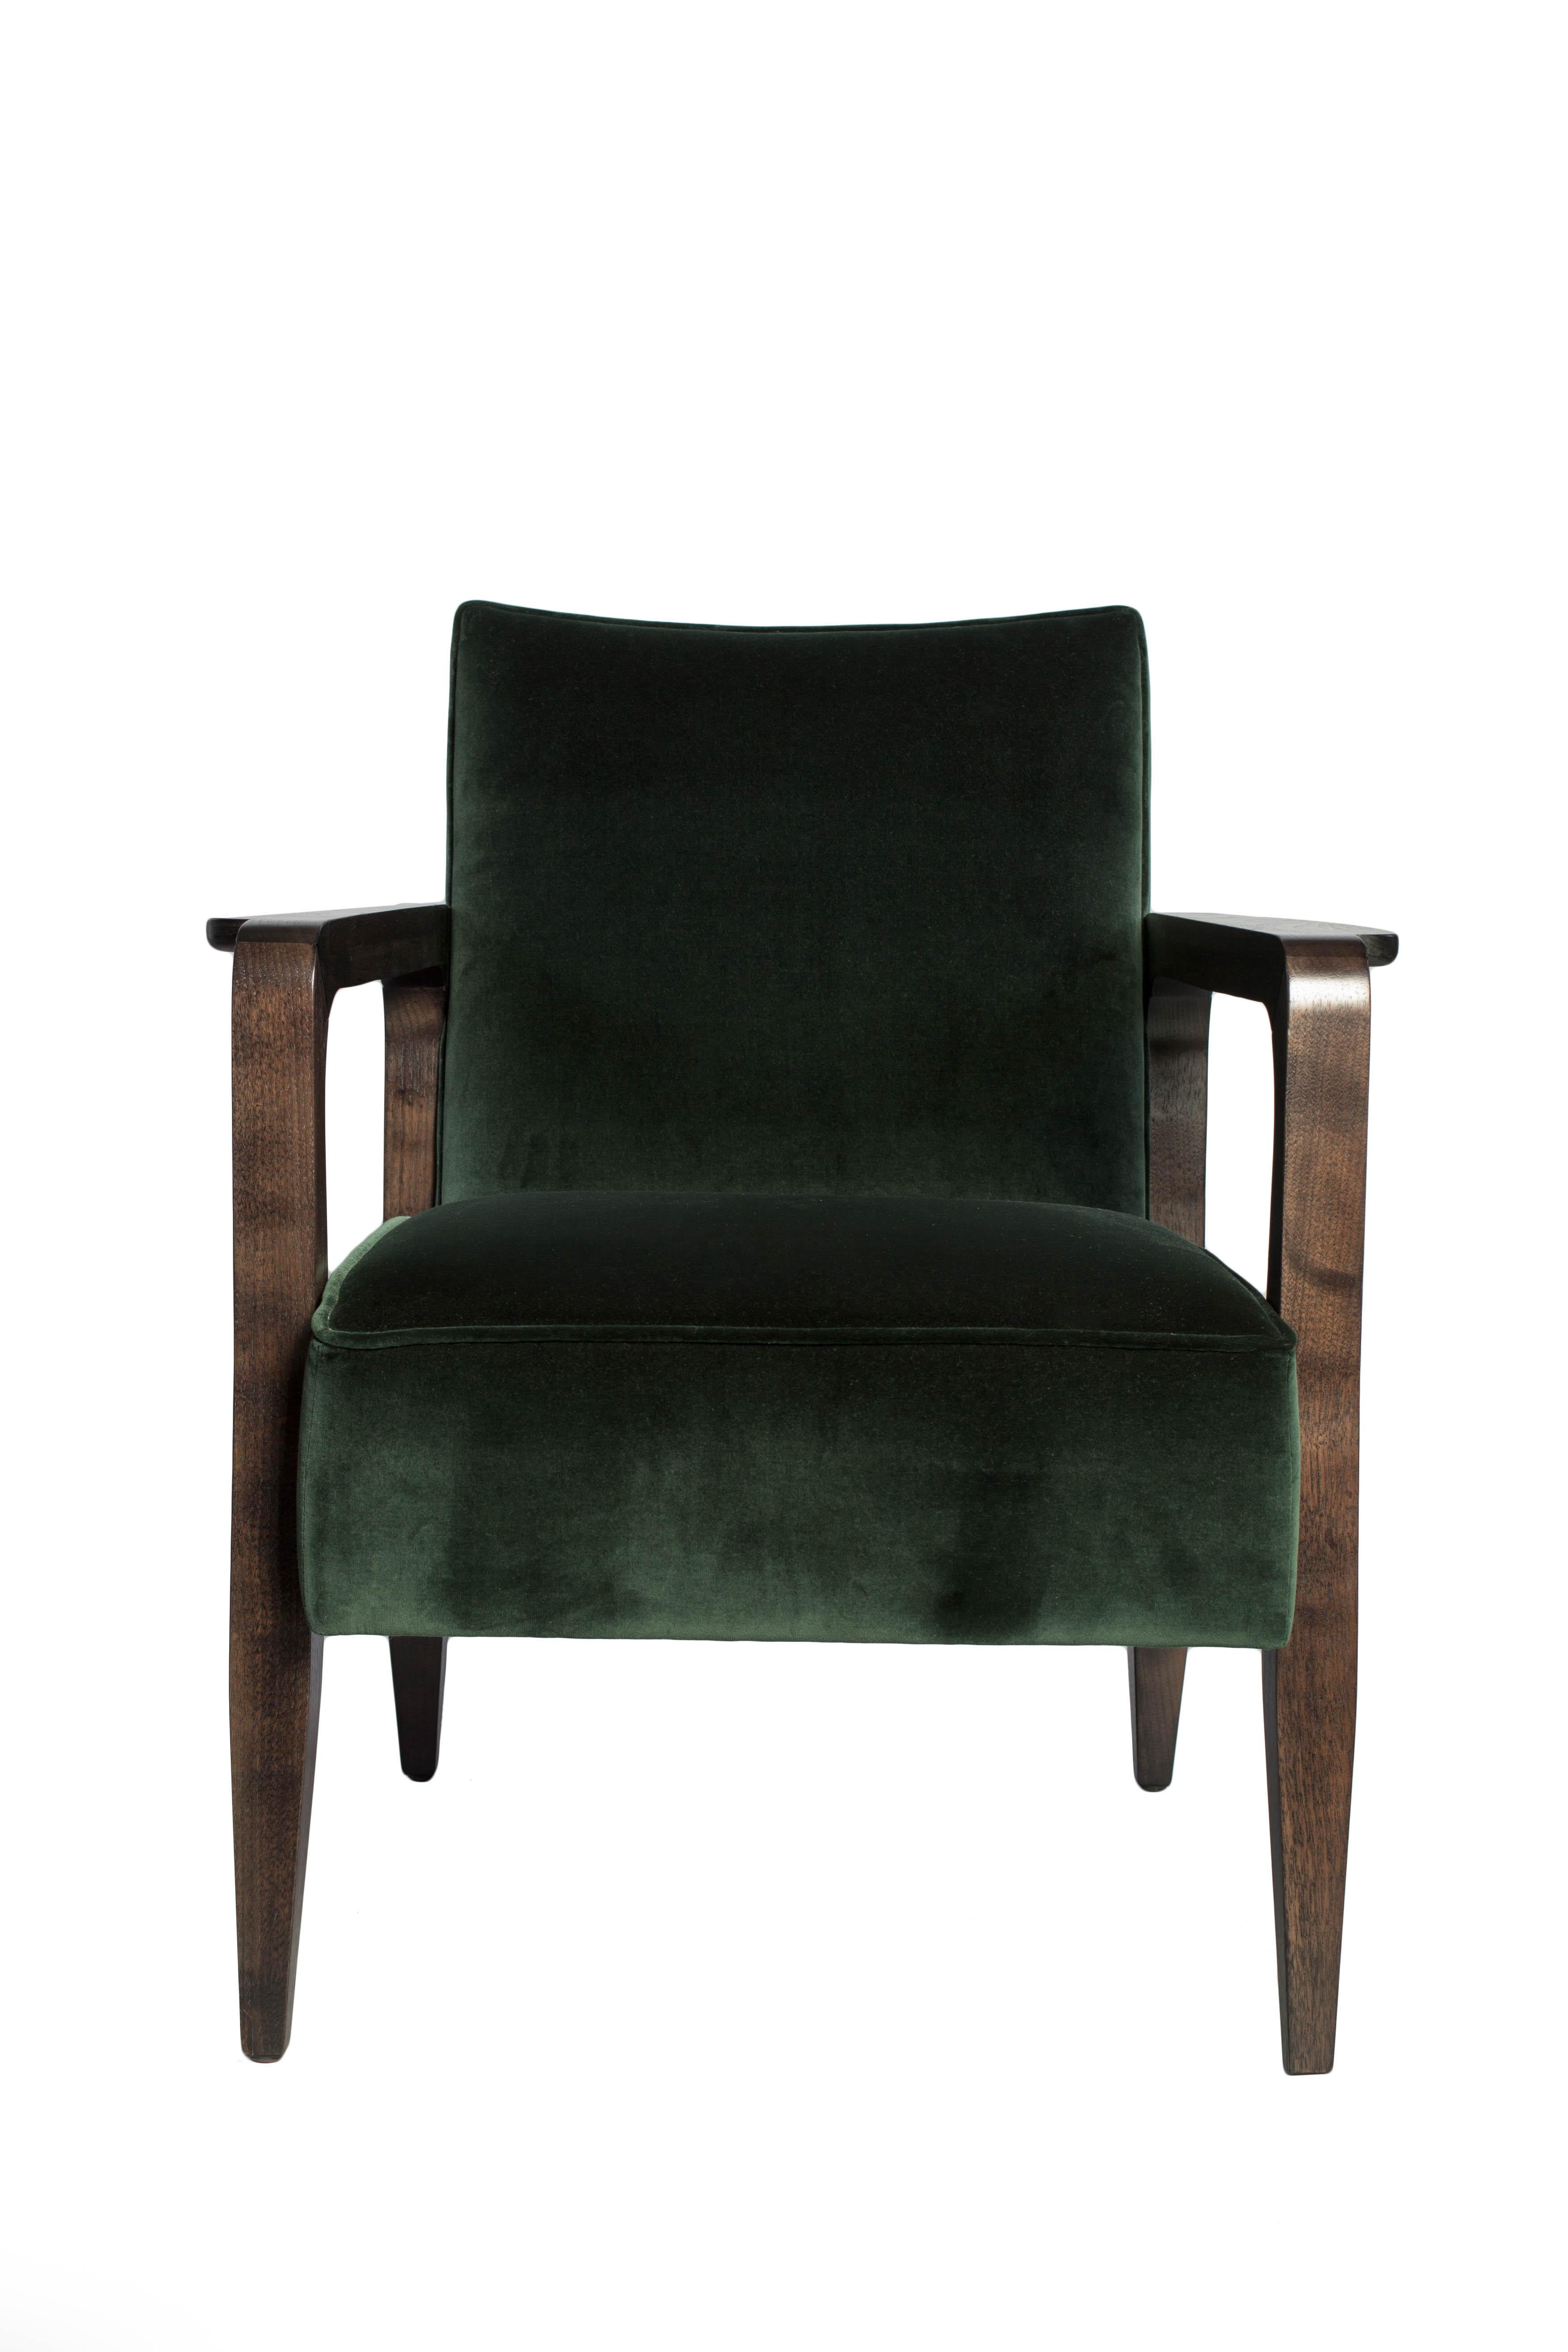 Art Deco Inspired Atena Armchair in Black America Walnut and Rio Fabric For Sale 1